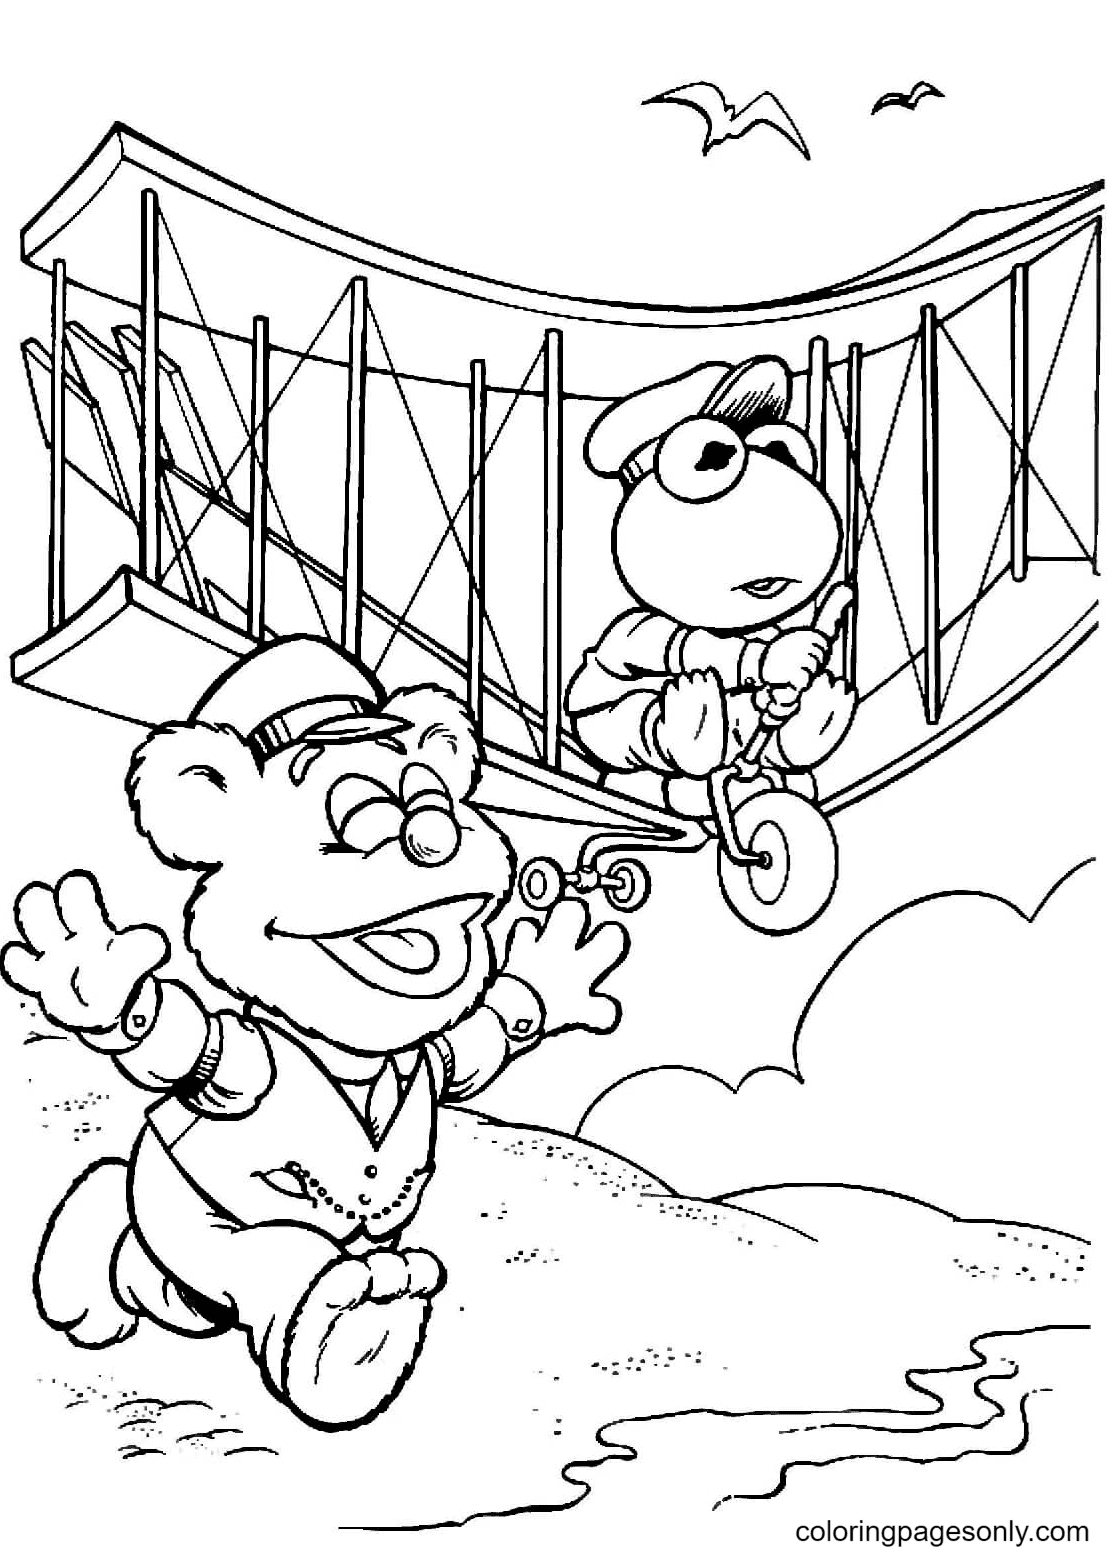 Kermit and Fozzie Coloring Pages